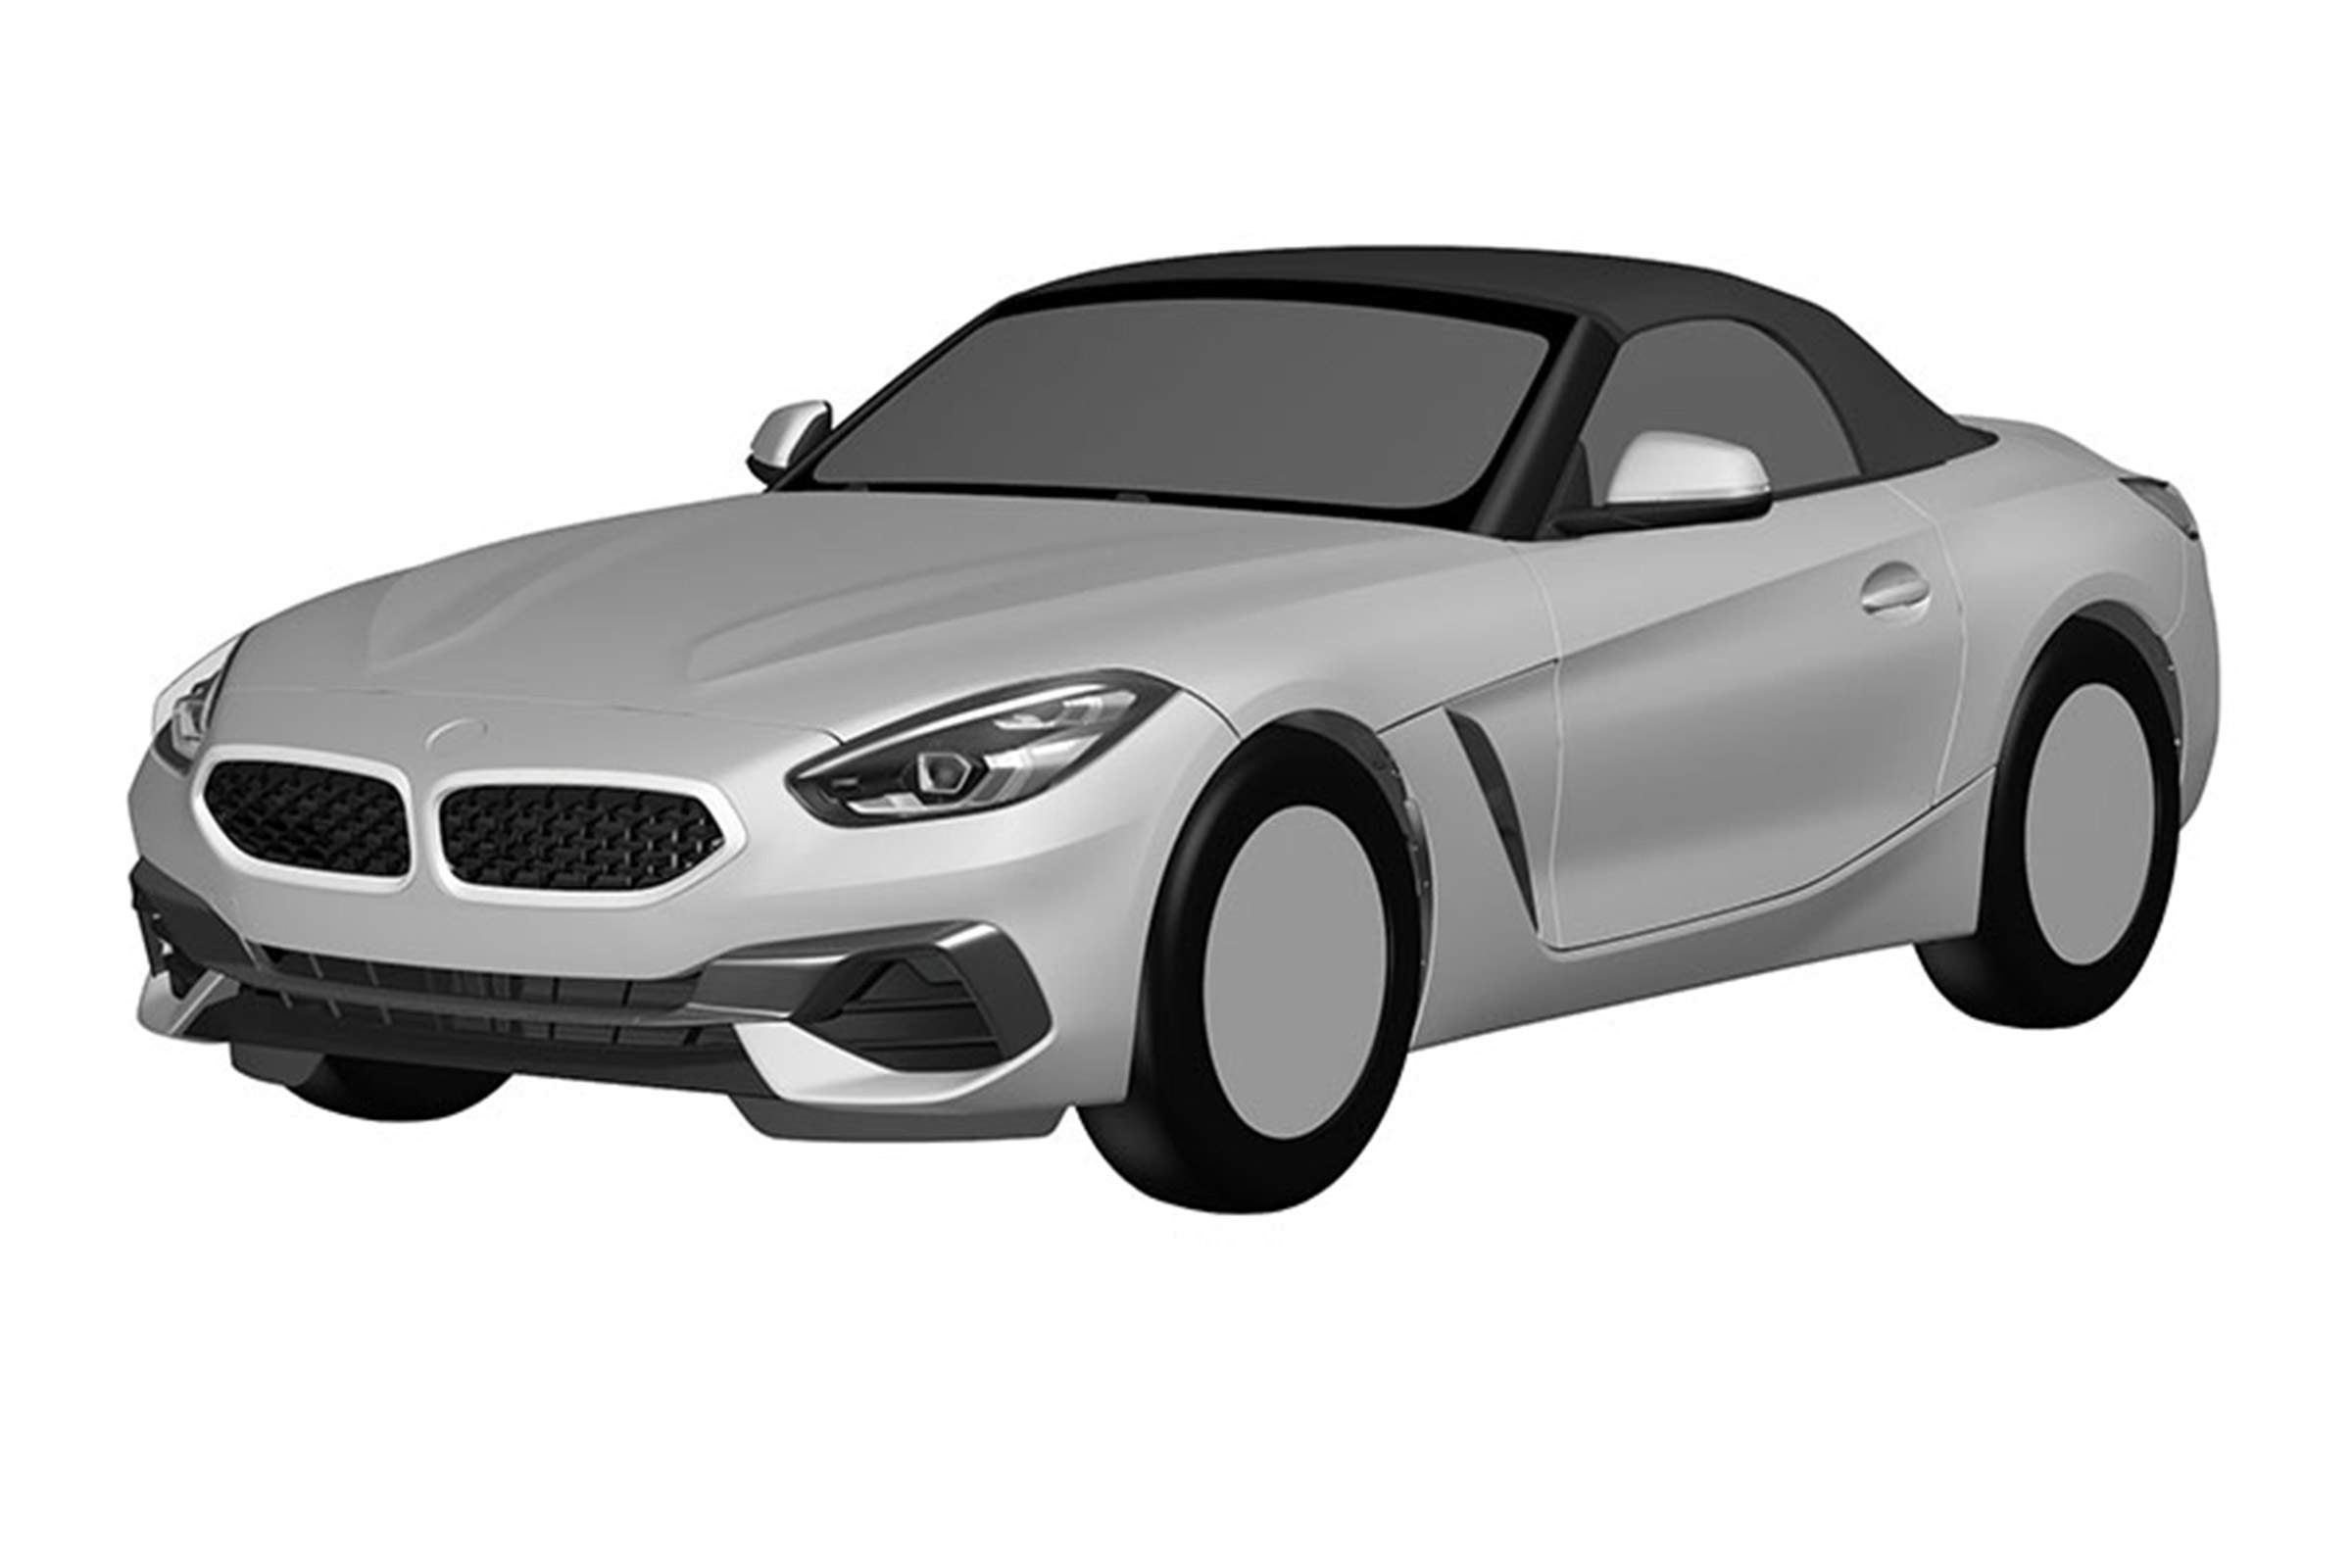 Production-ready 2019 BMW Z4 Roadster leaked in patent drawings